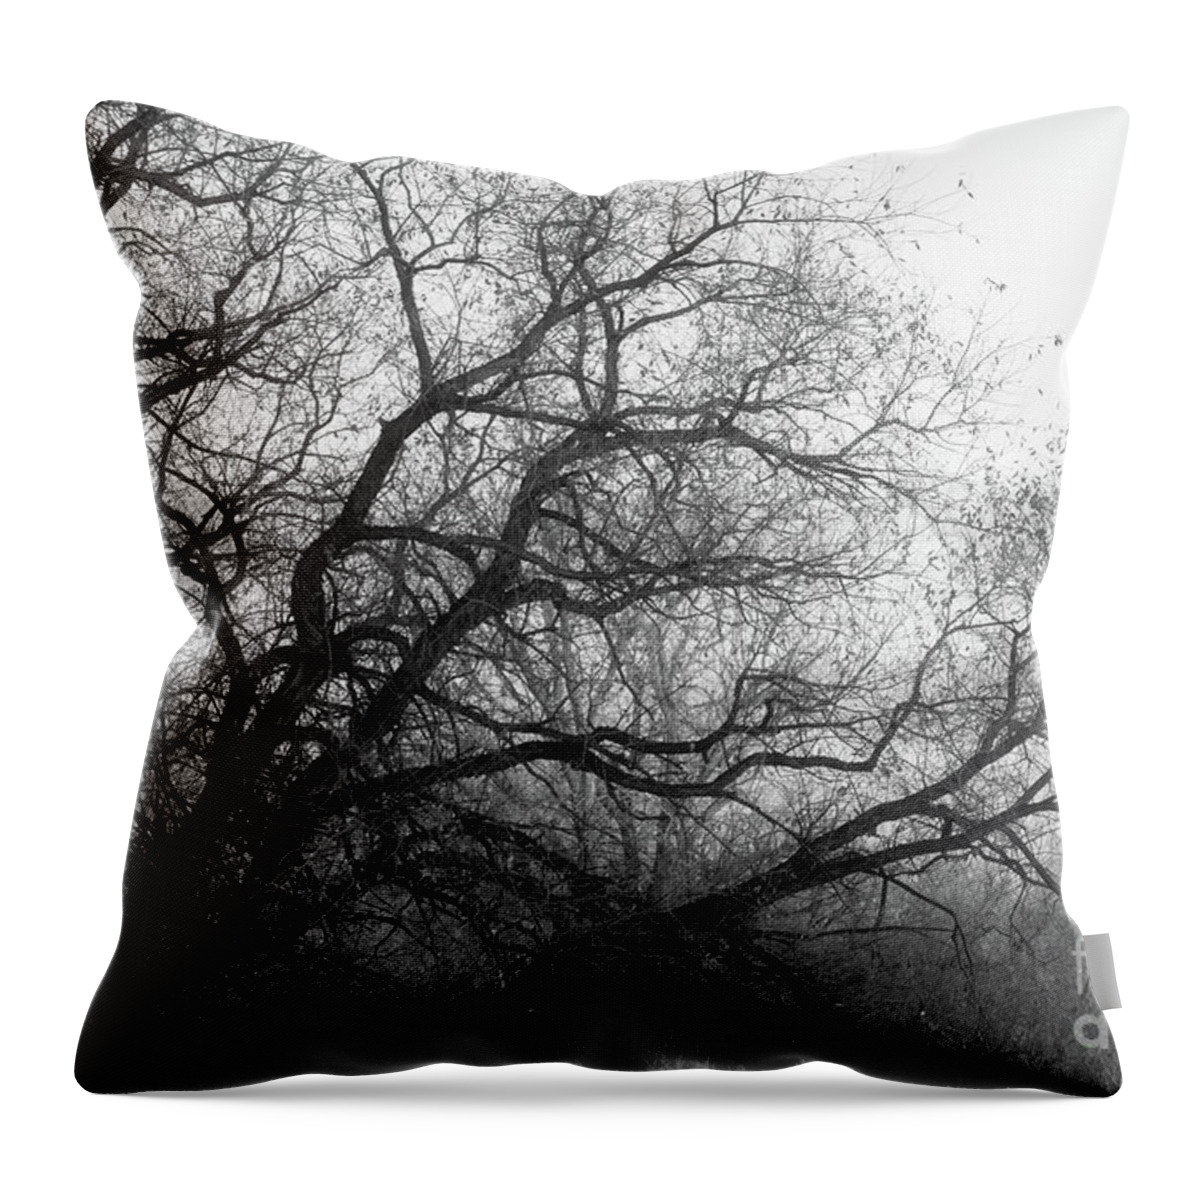 Spooky Throw Pillow featuring the photograph Enchanted Forest by Ana V Ramirez